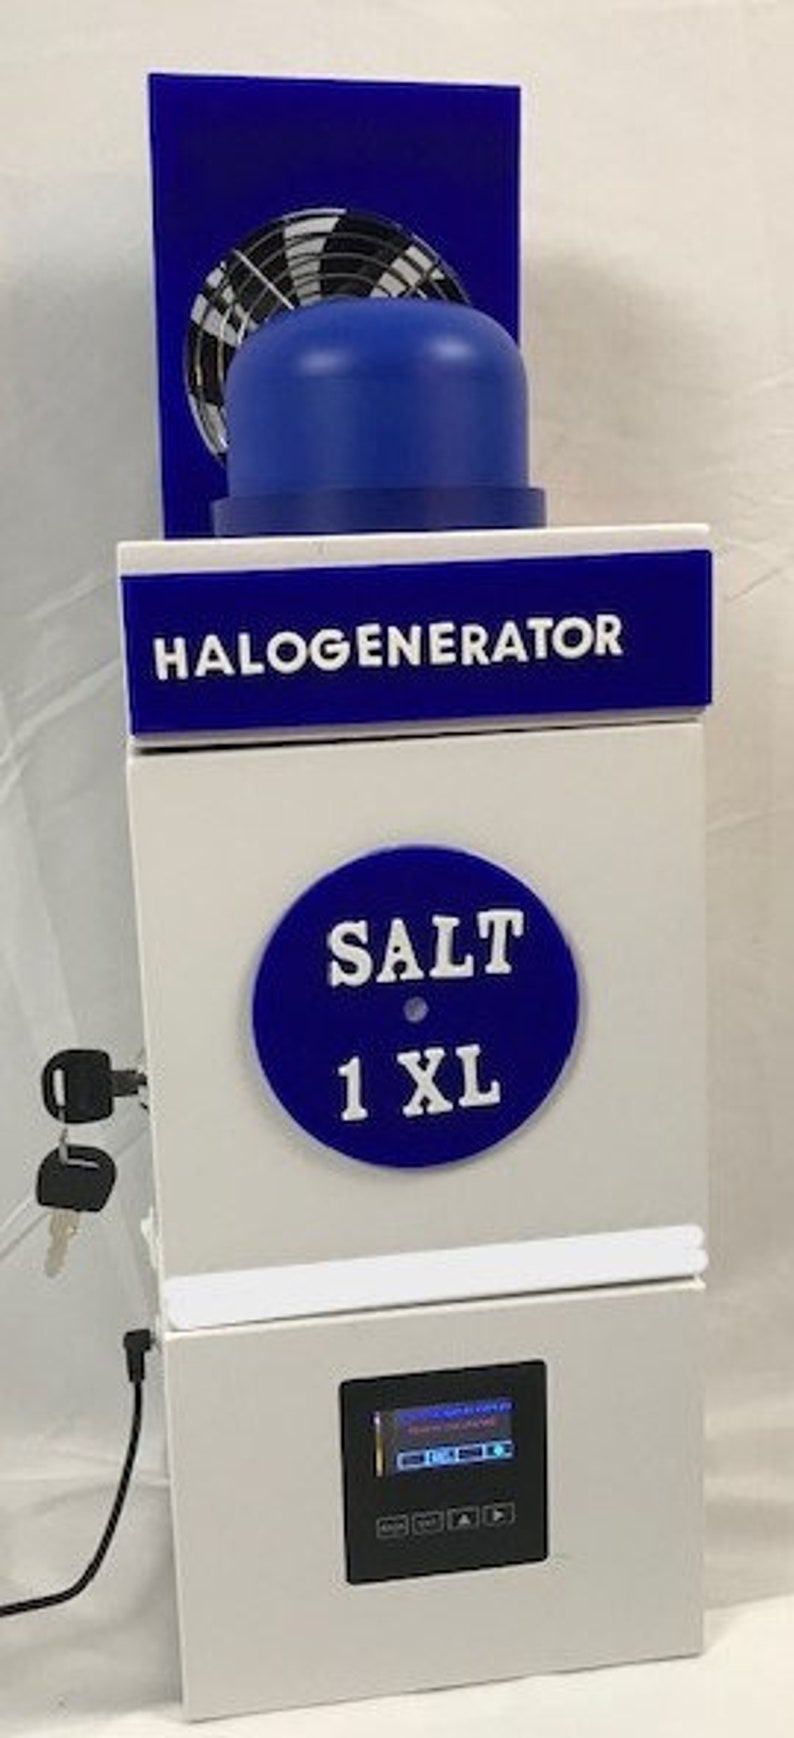 Salt Room DIY kit for Halotherapy with Halogenerator image 9